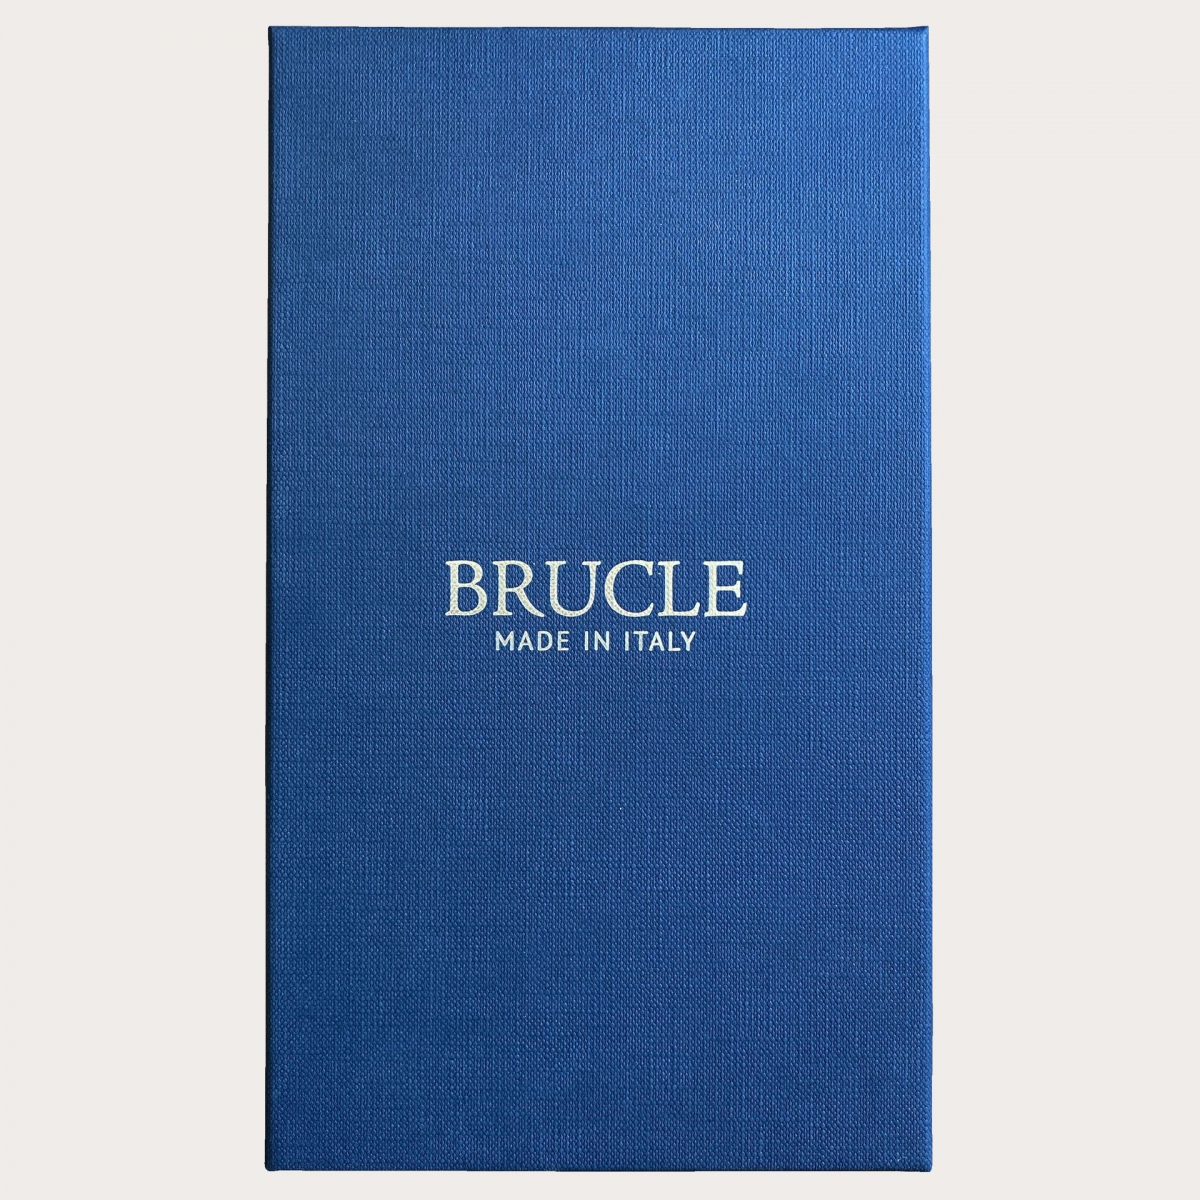 BRUCLE Y-shaped thin braces for men and women with stripes, burgundy and pearl